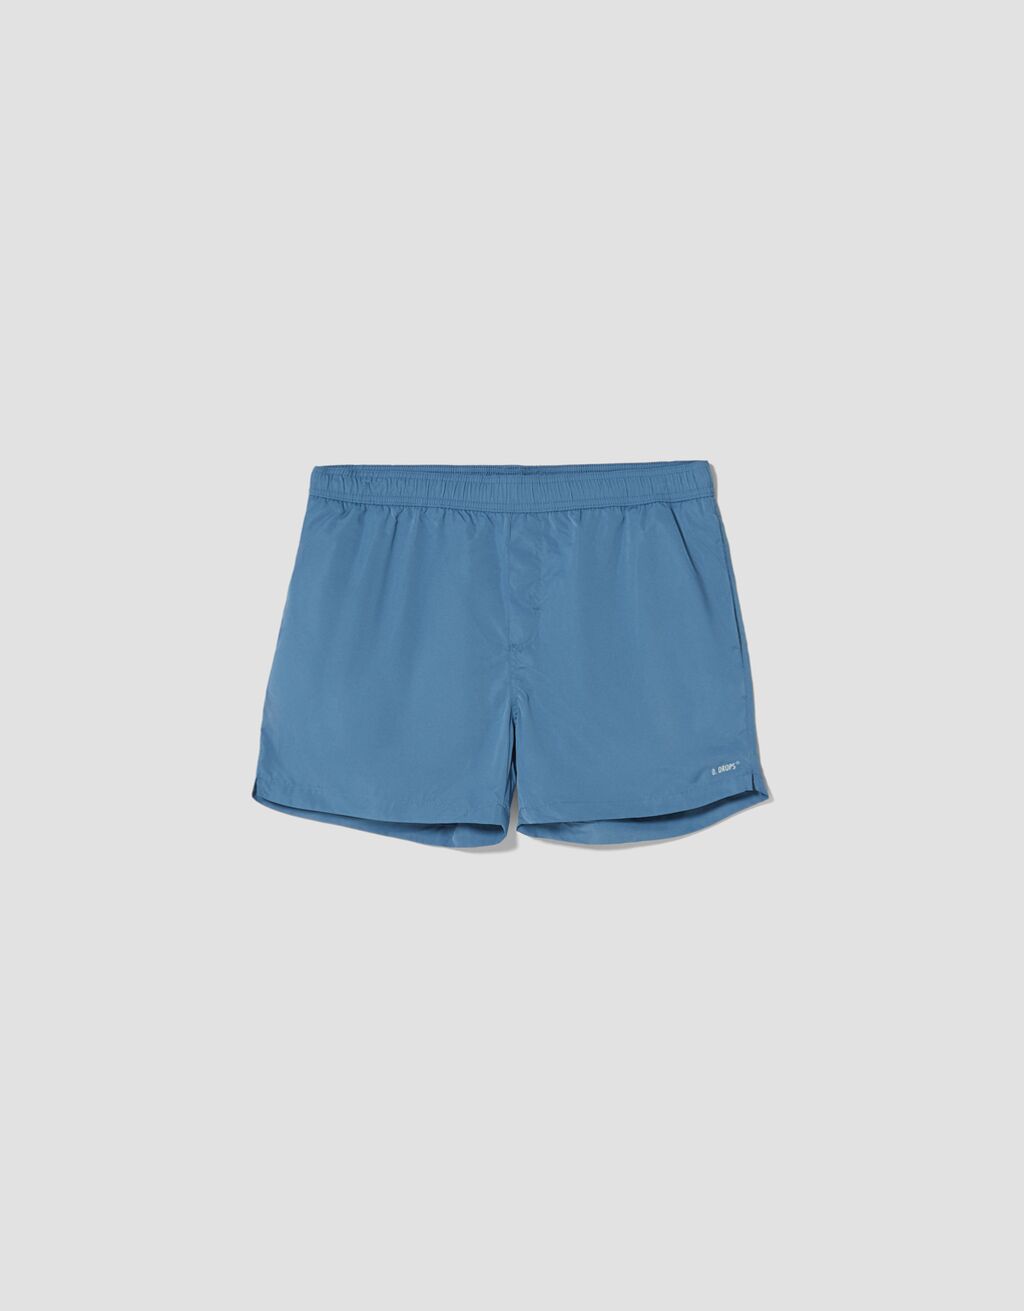 Basic casual swimming trunks